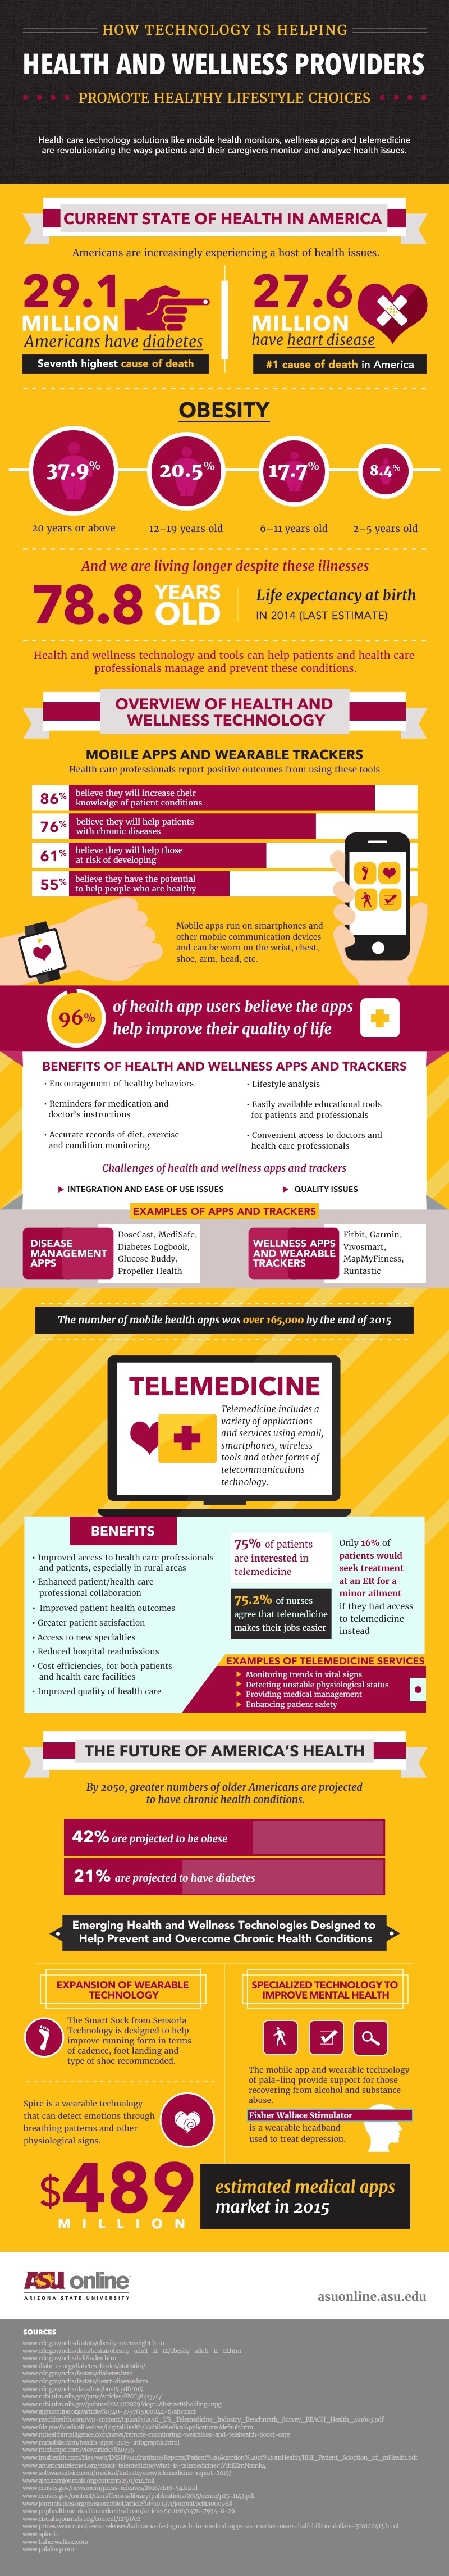 How Technology Promotes Healthy Lifestyle Choices Infographic